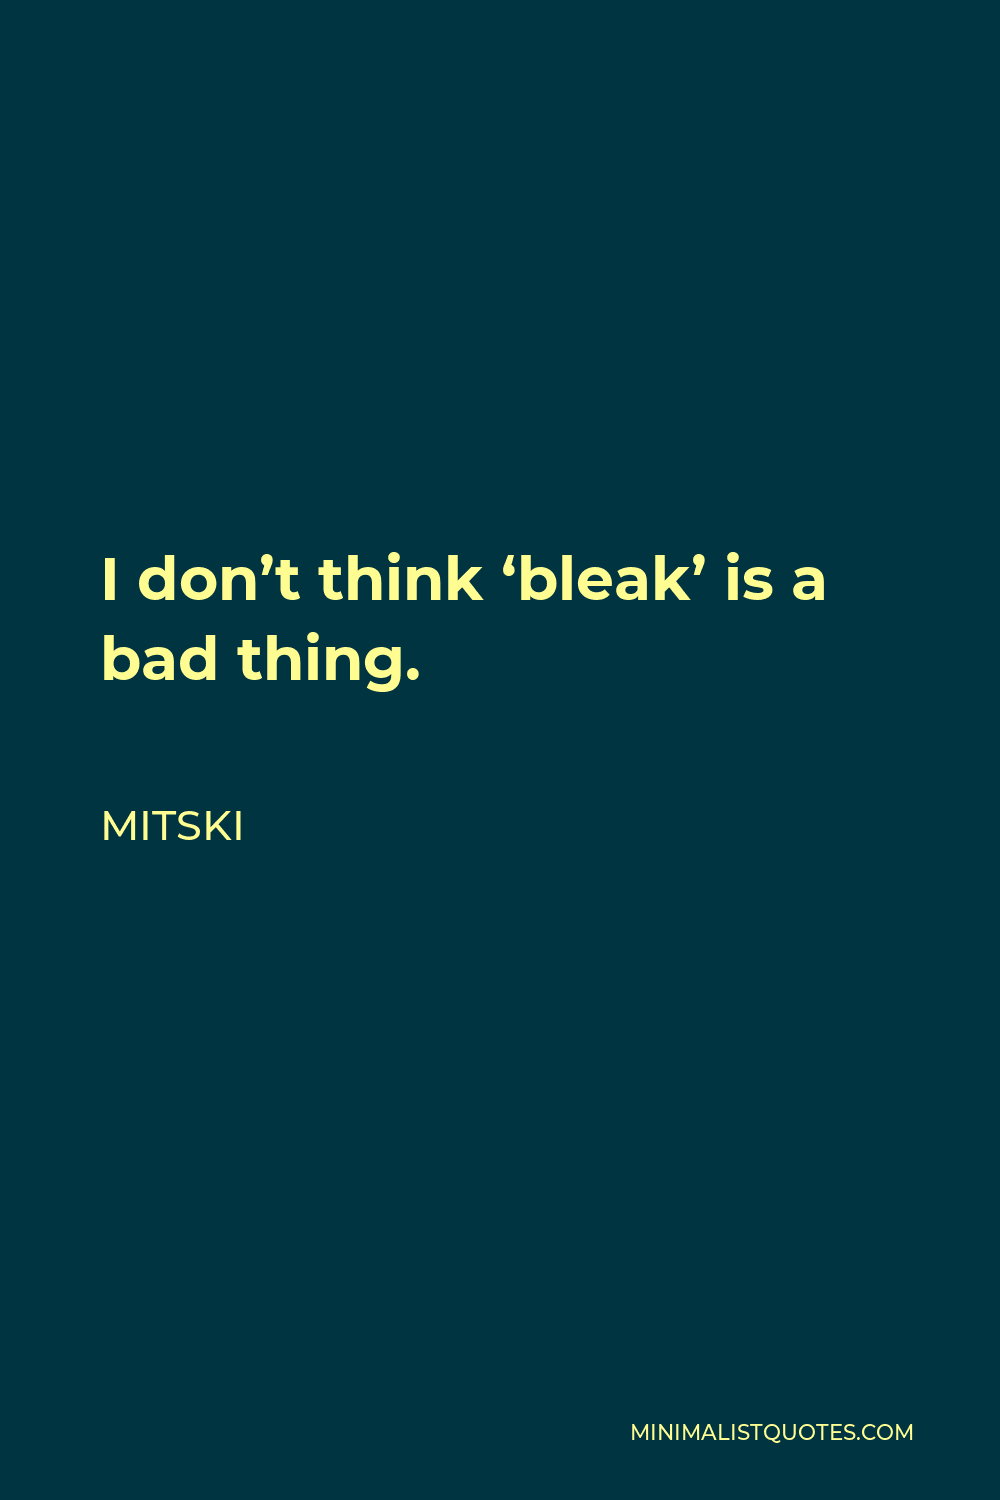 Mitski Quote - I don’t think ‘bleak’ is a bad thing.